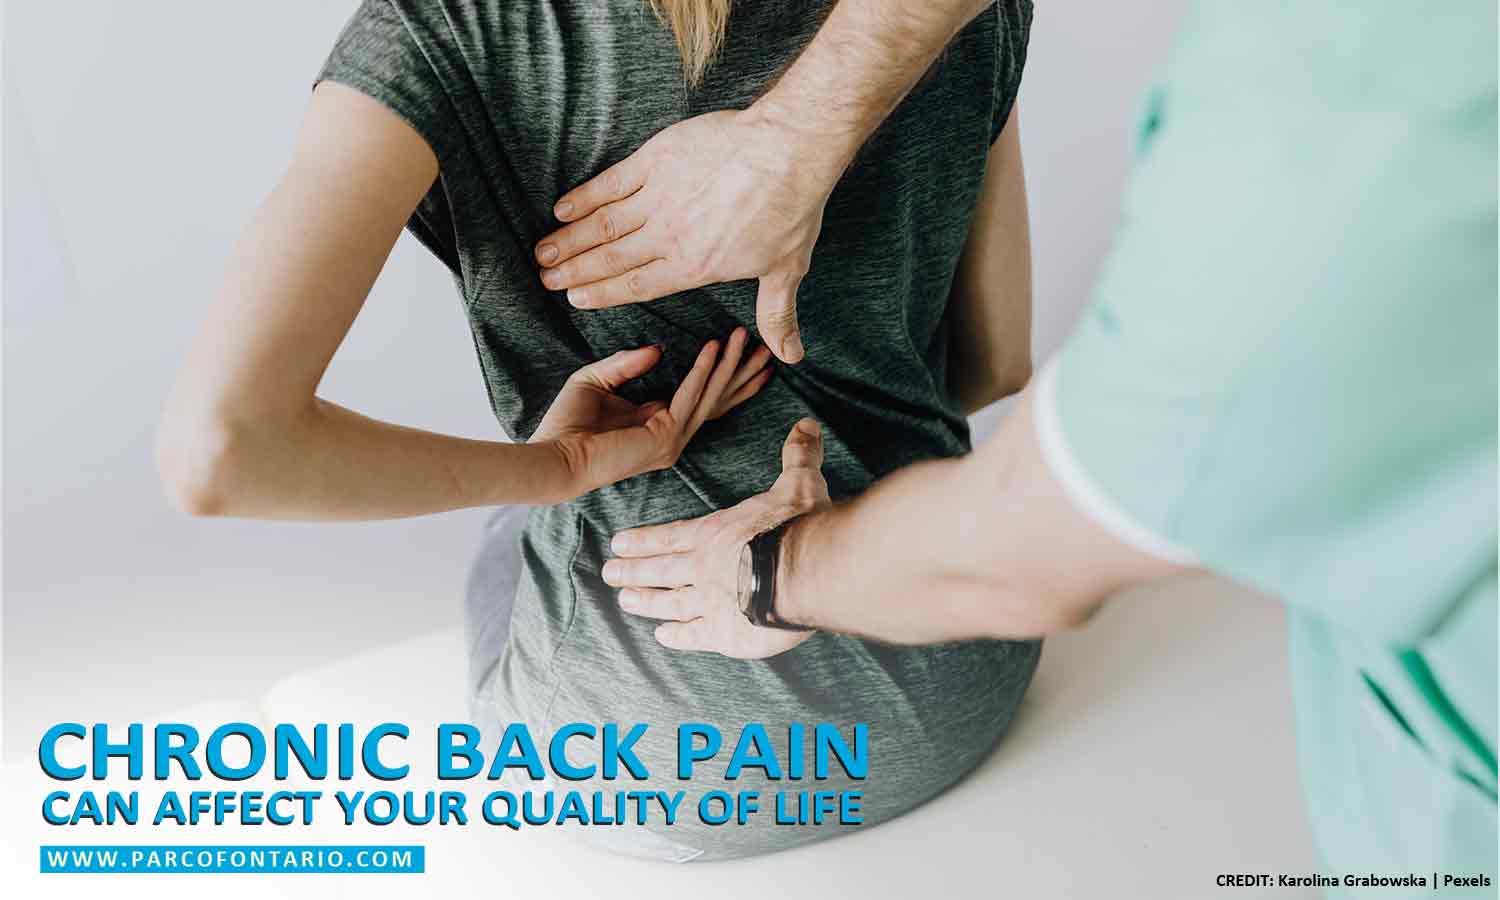 5 Recommended Massages for Chronic Back Pain